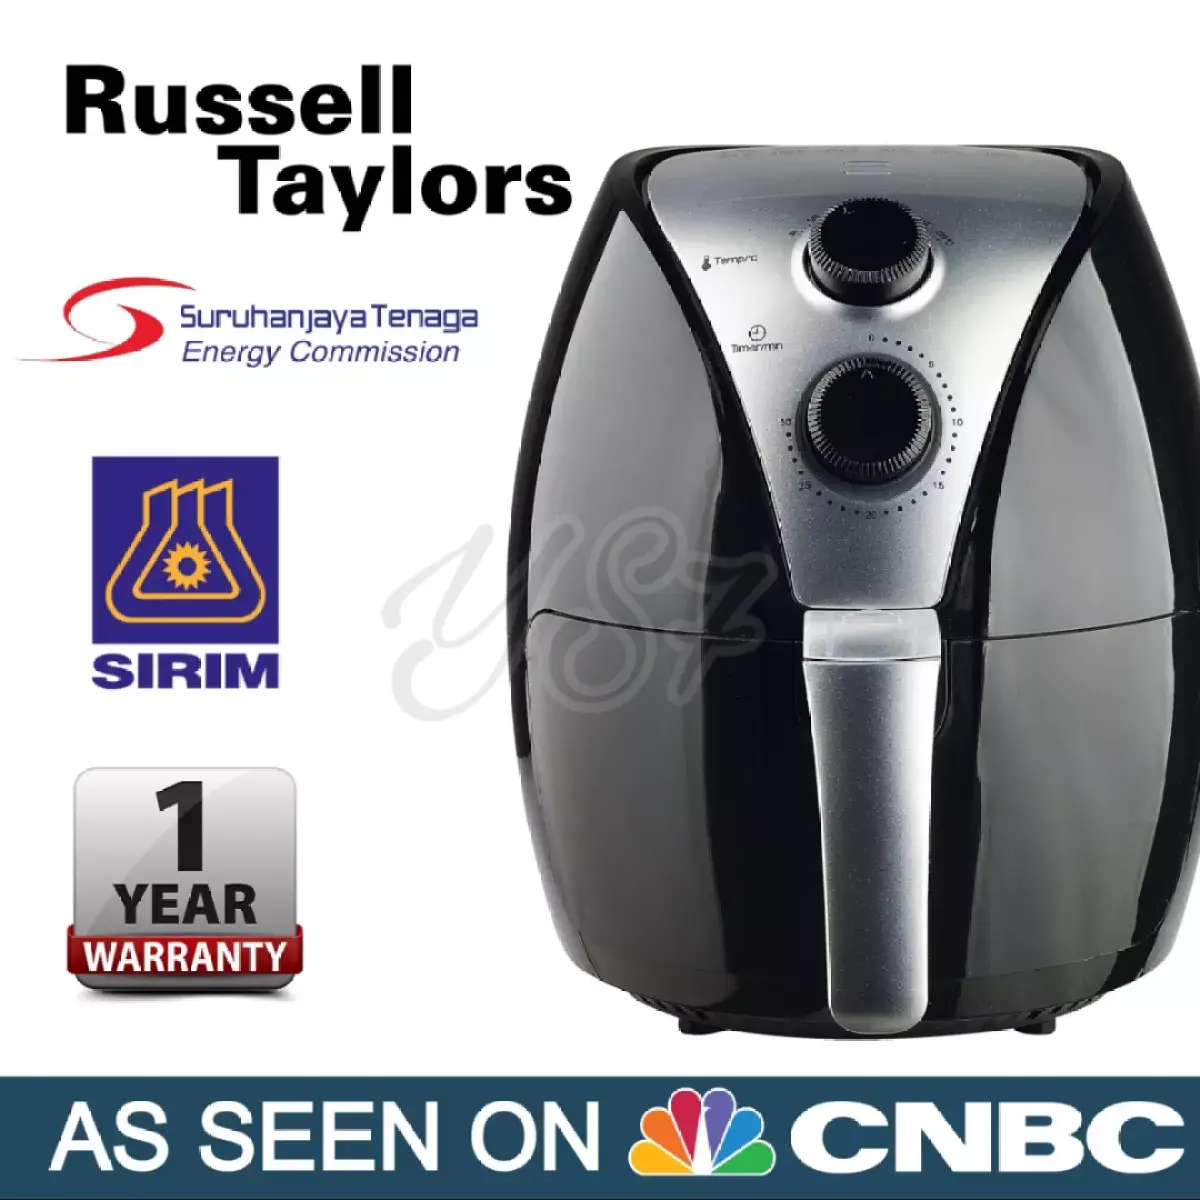 Ready Stock Russell Taylors Air Fryer Large 3 8l Af 24 Lazada